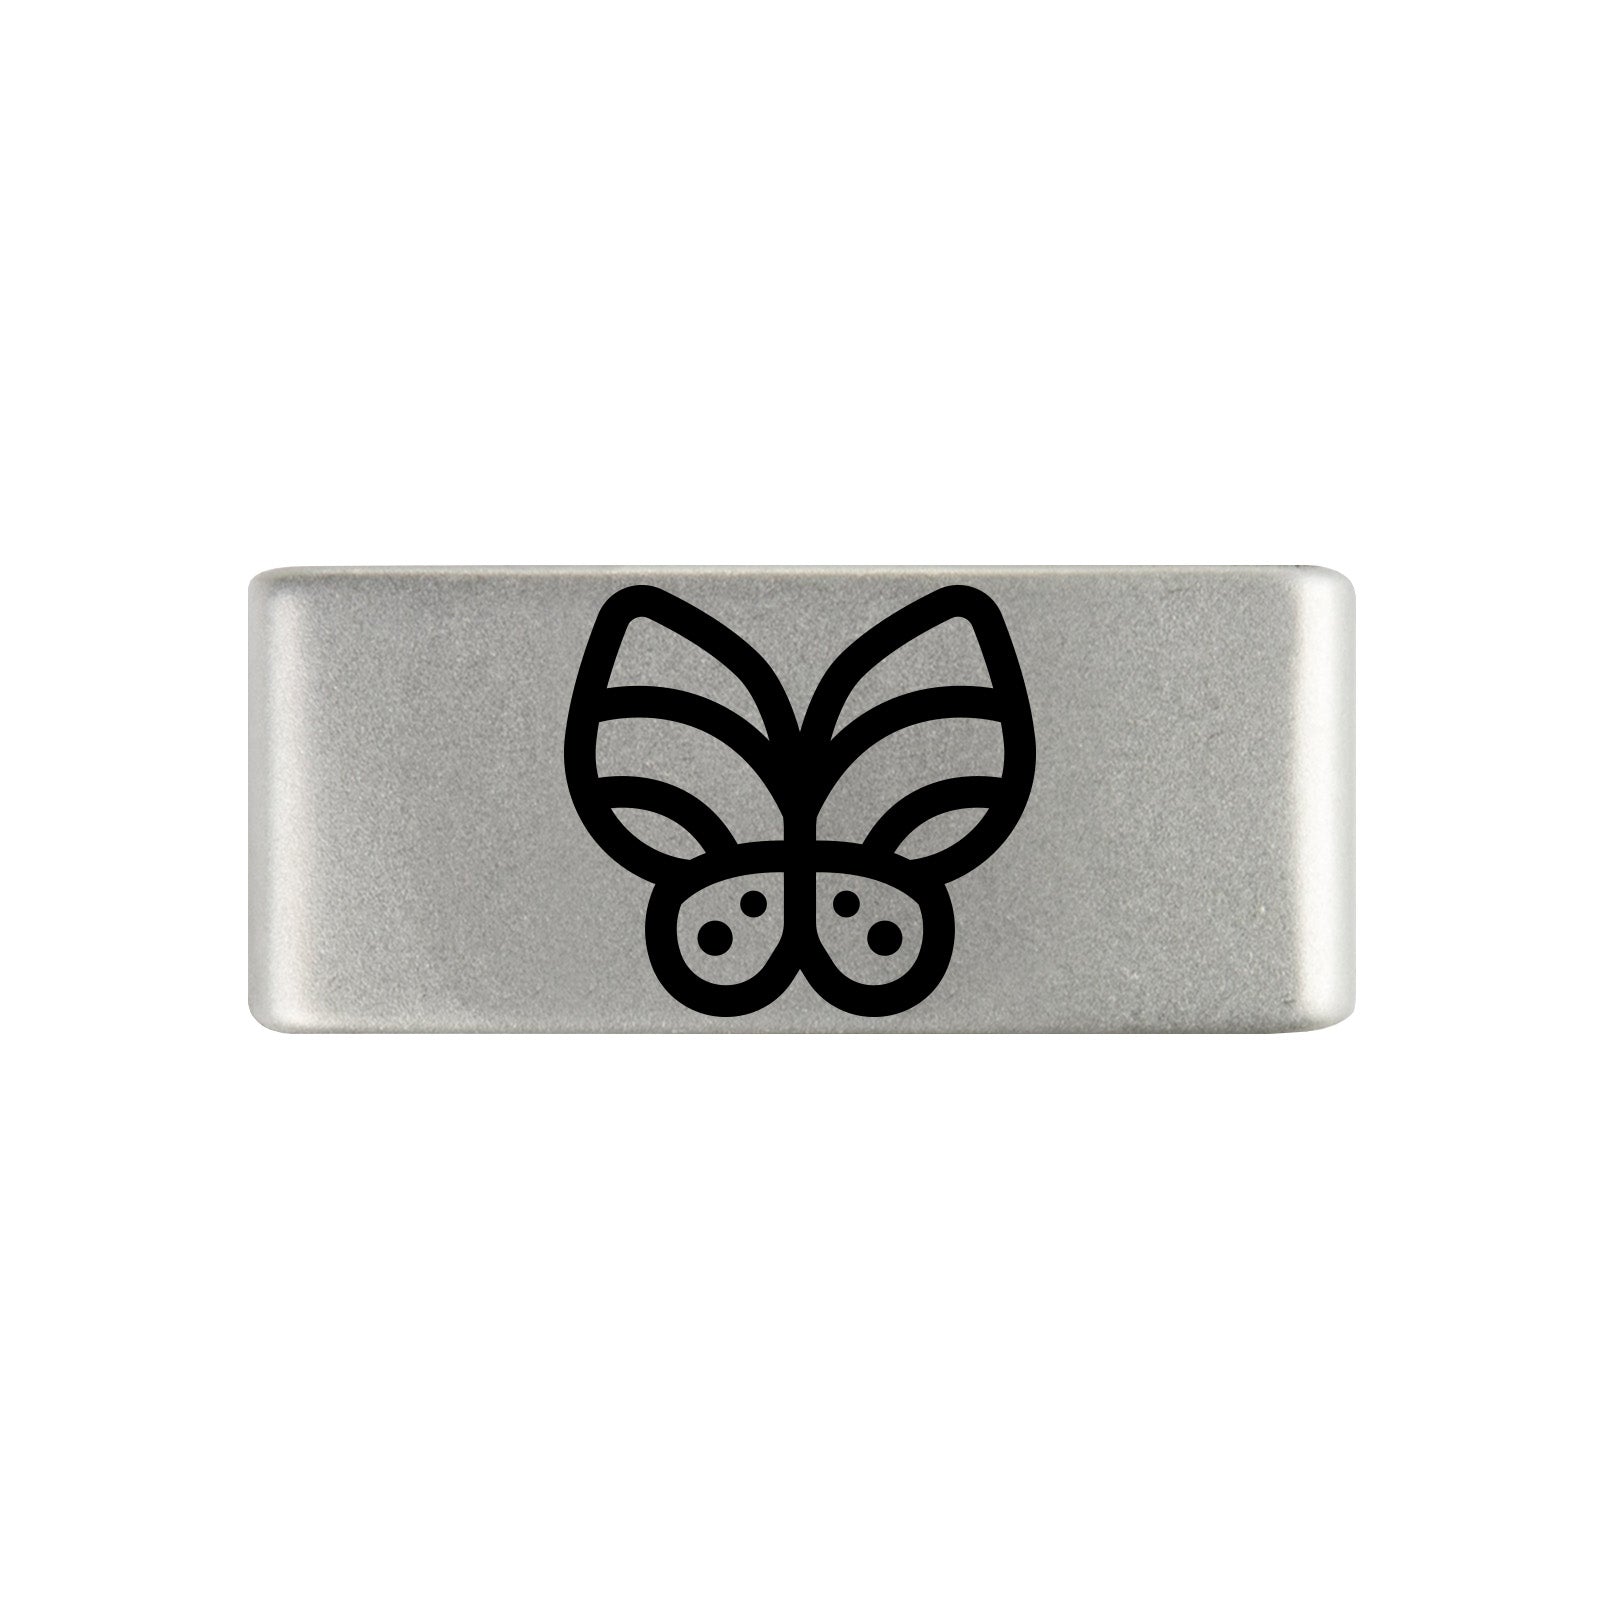 Butterfly Badge Badge 13mm - ROAD iD